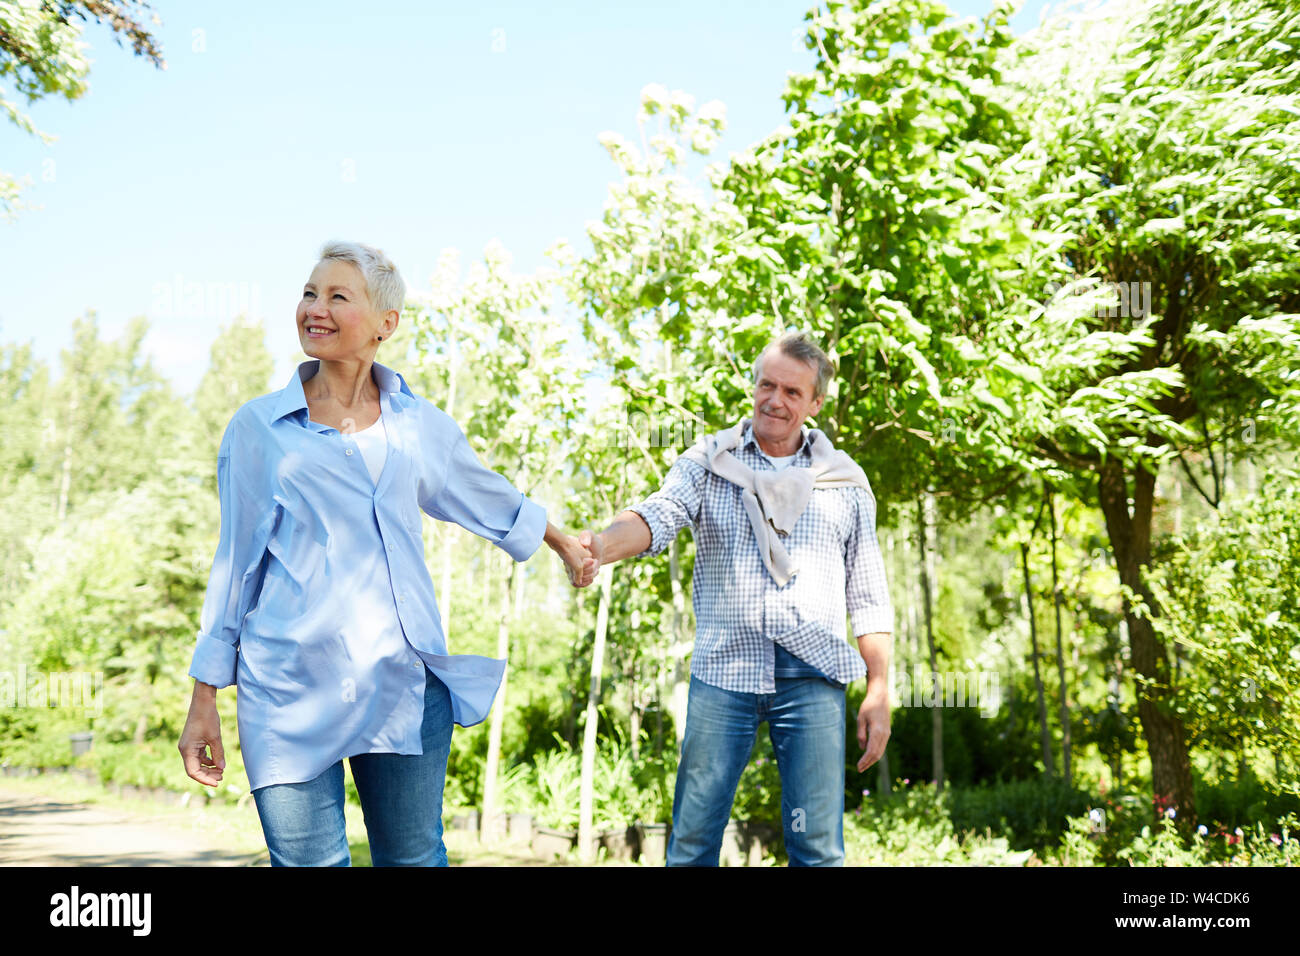 Portrait of happy senior woman leading husband by hand while enjoying walk in Summer park, copy space Stock Photo